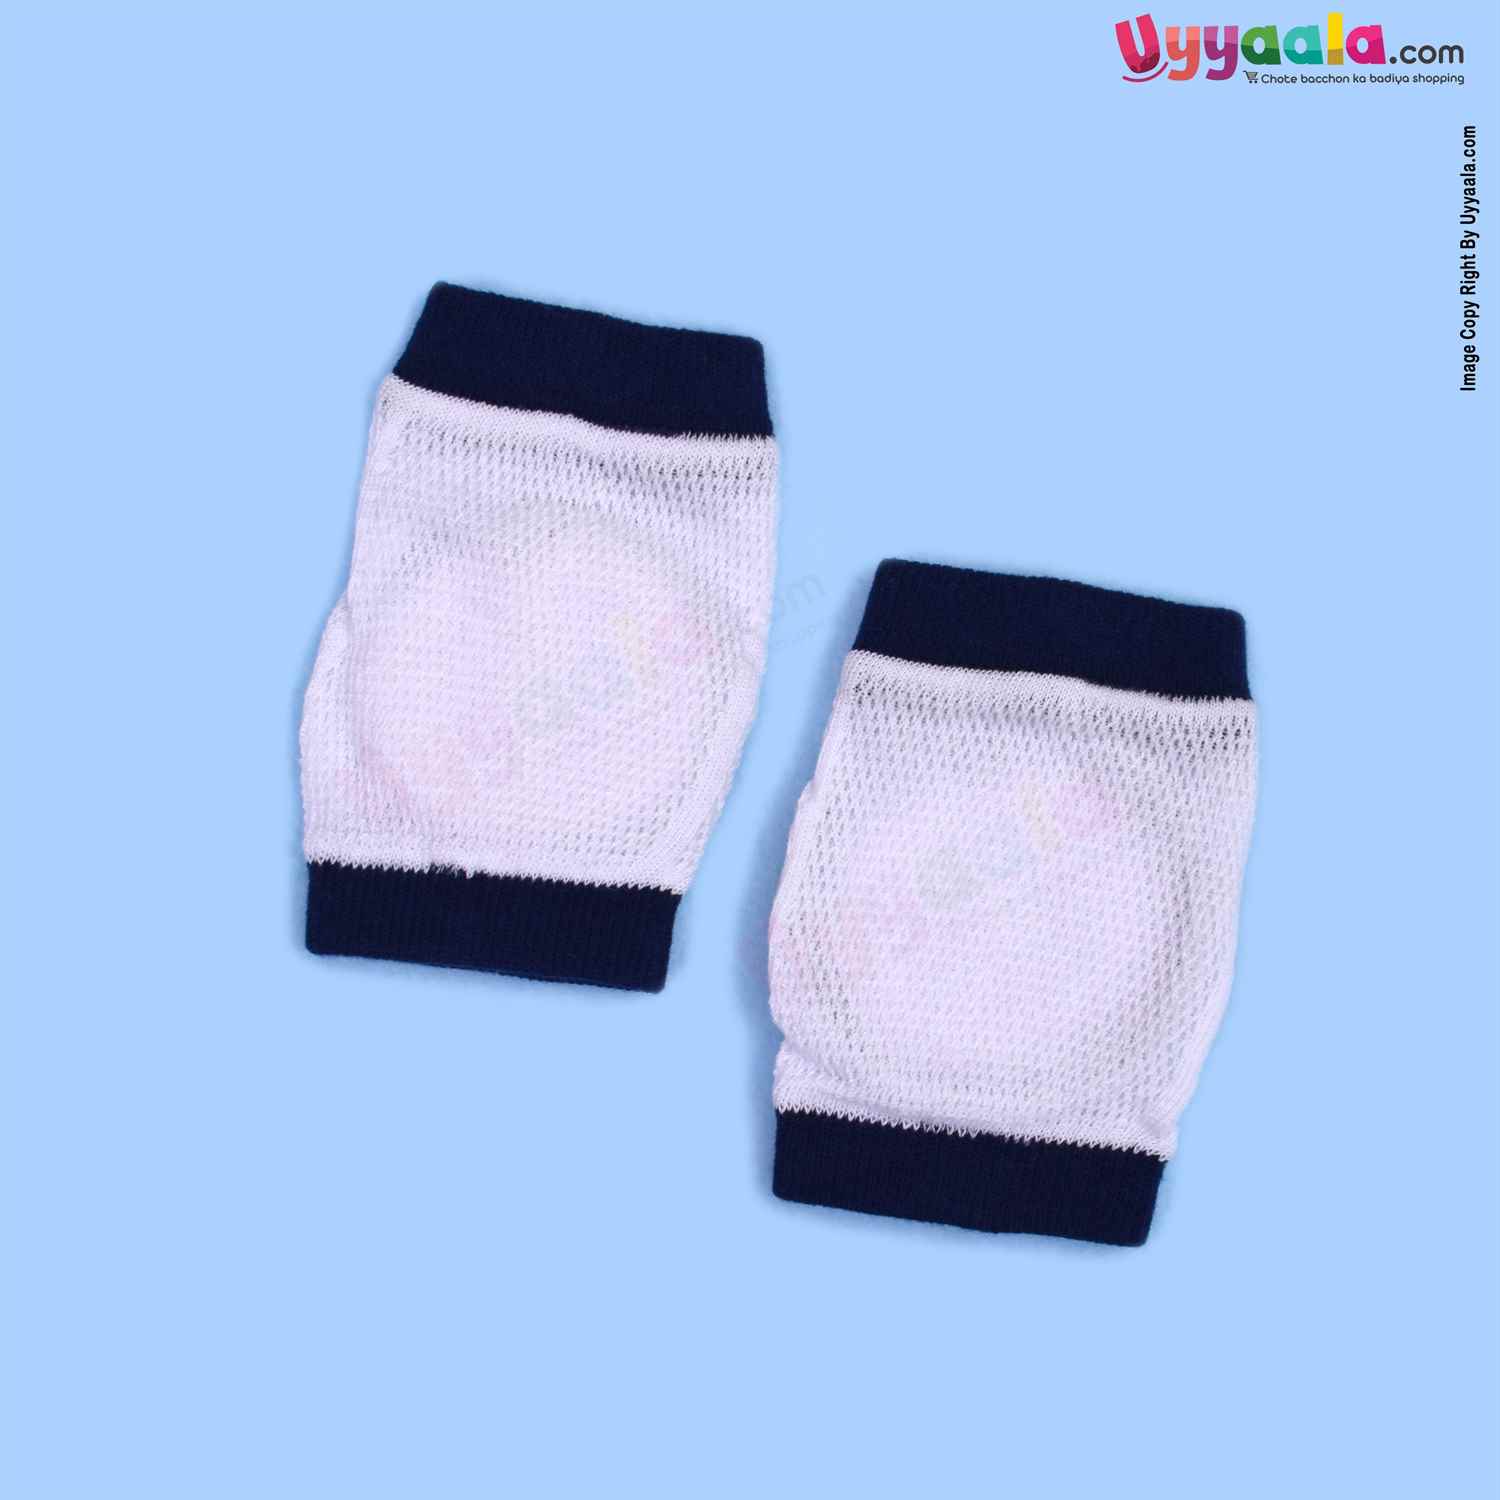 Knee Protection Pads for Babies